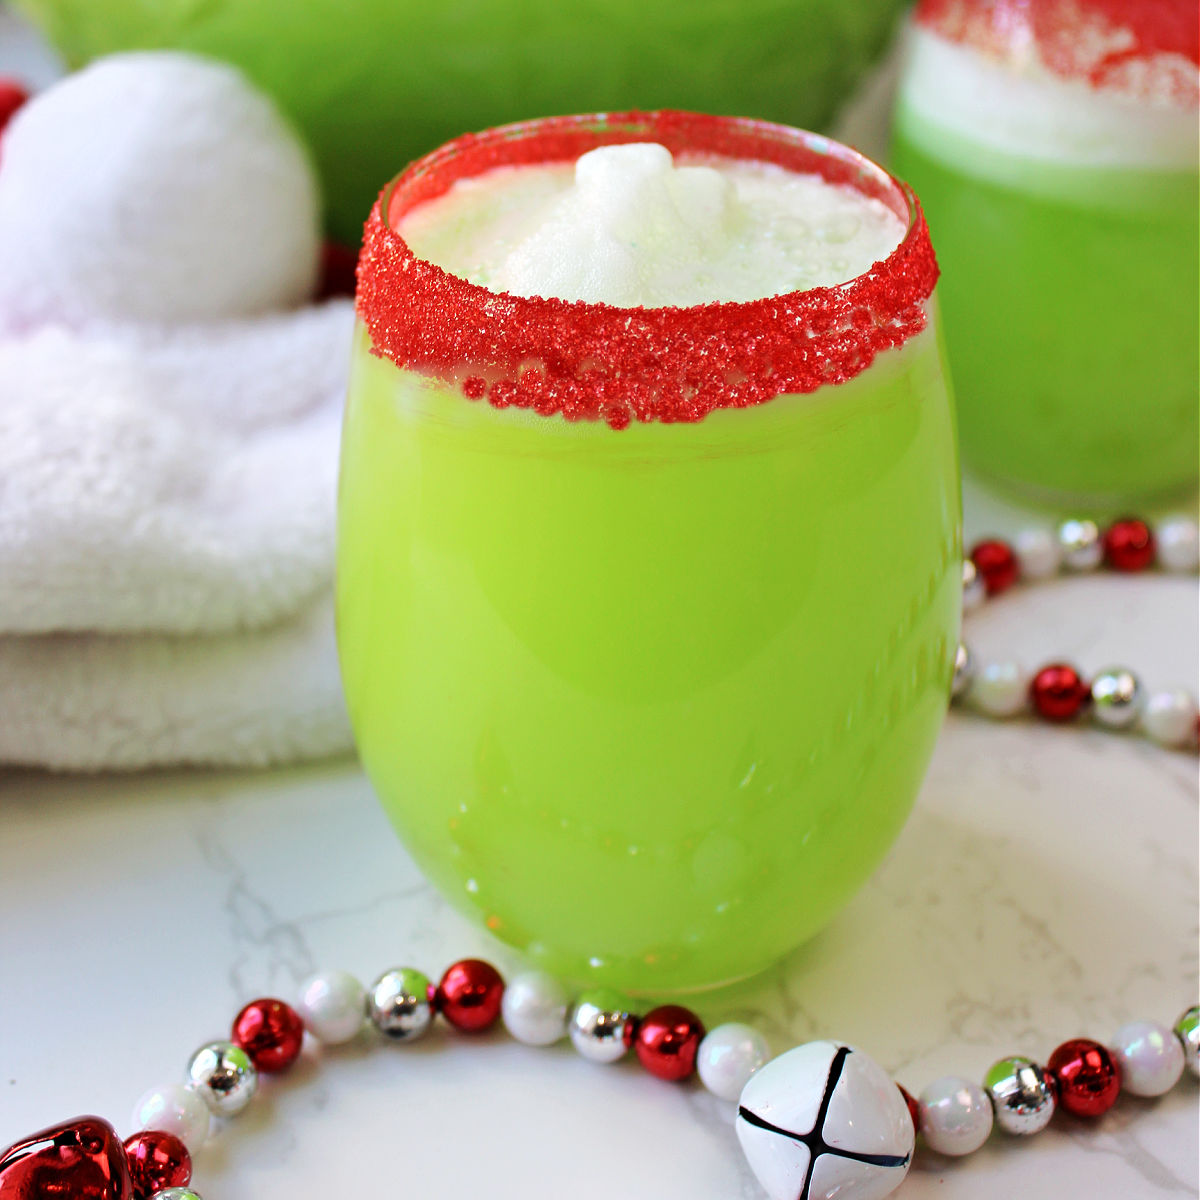 Grinch punch with Christmas decoration around the clear glass.